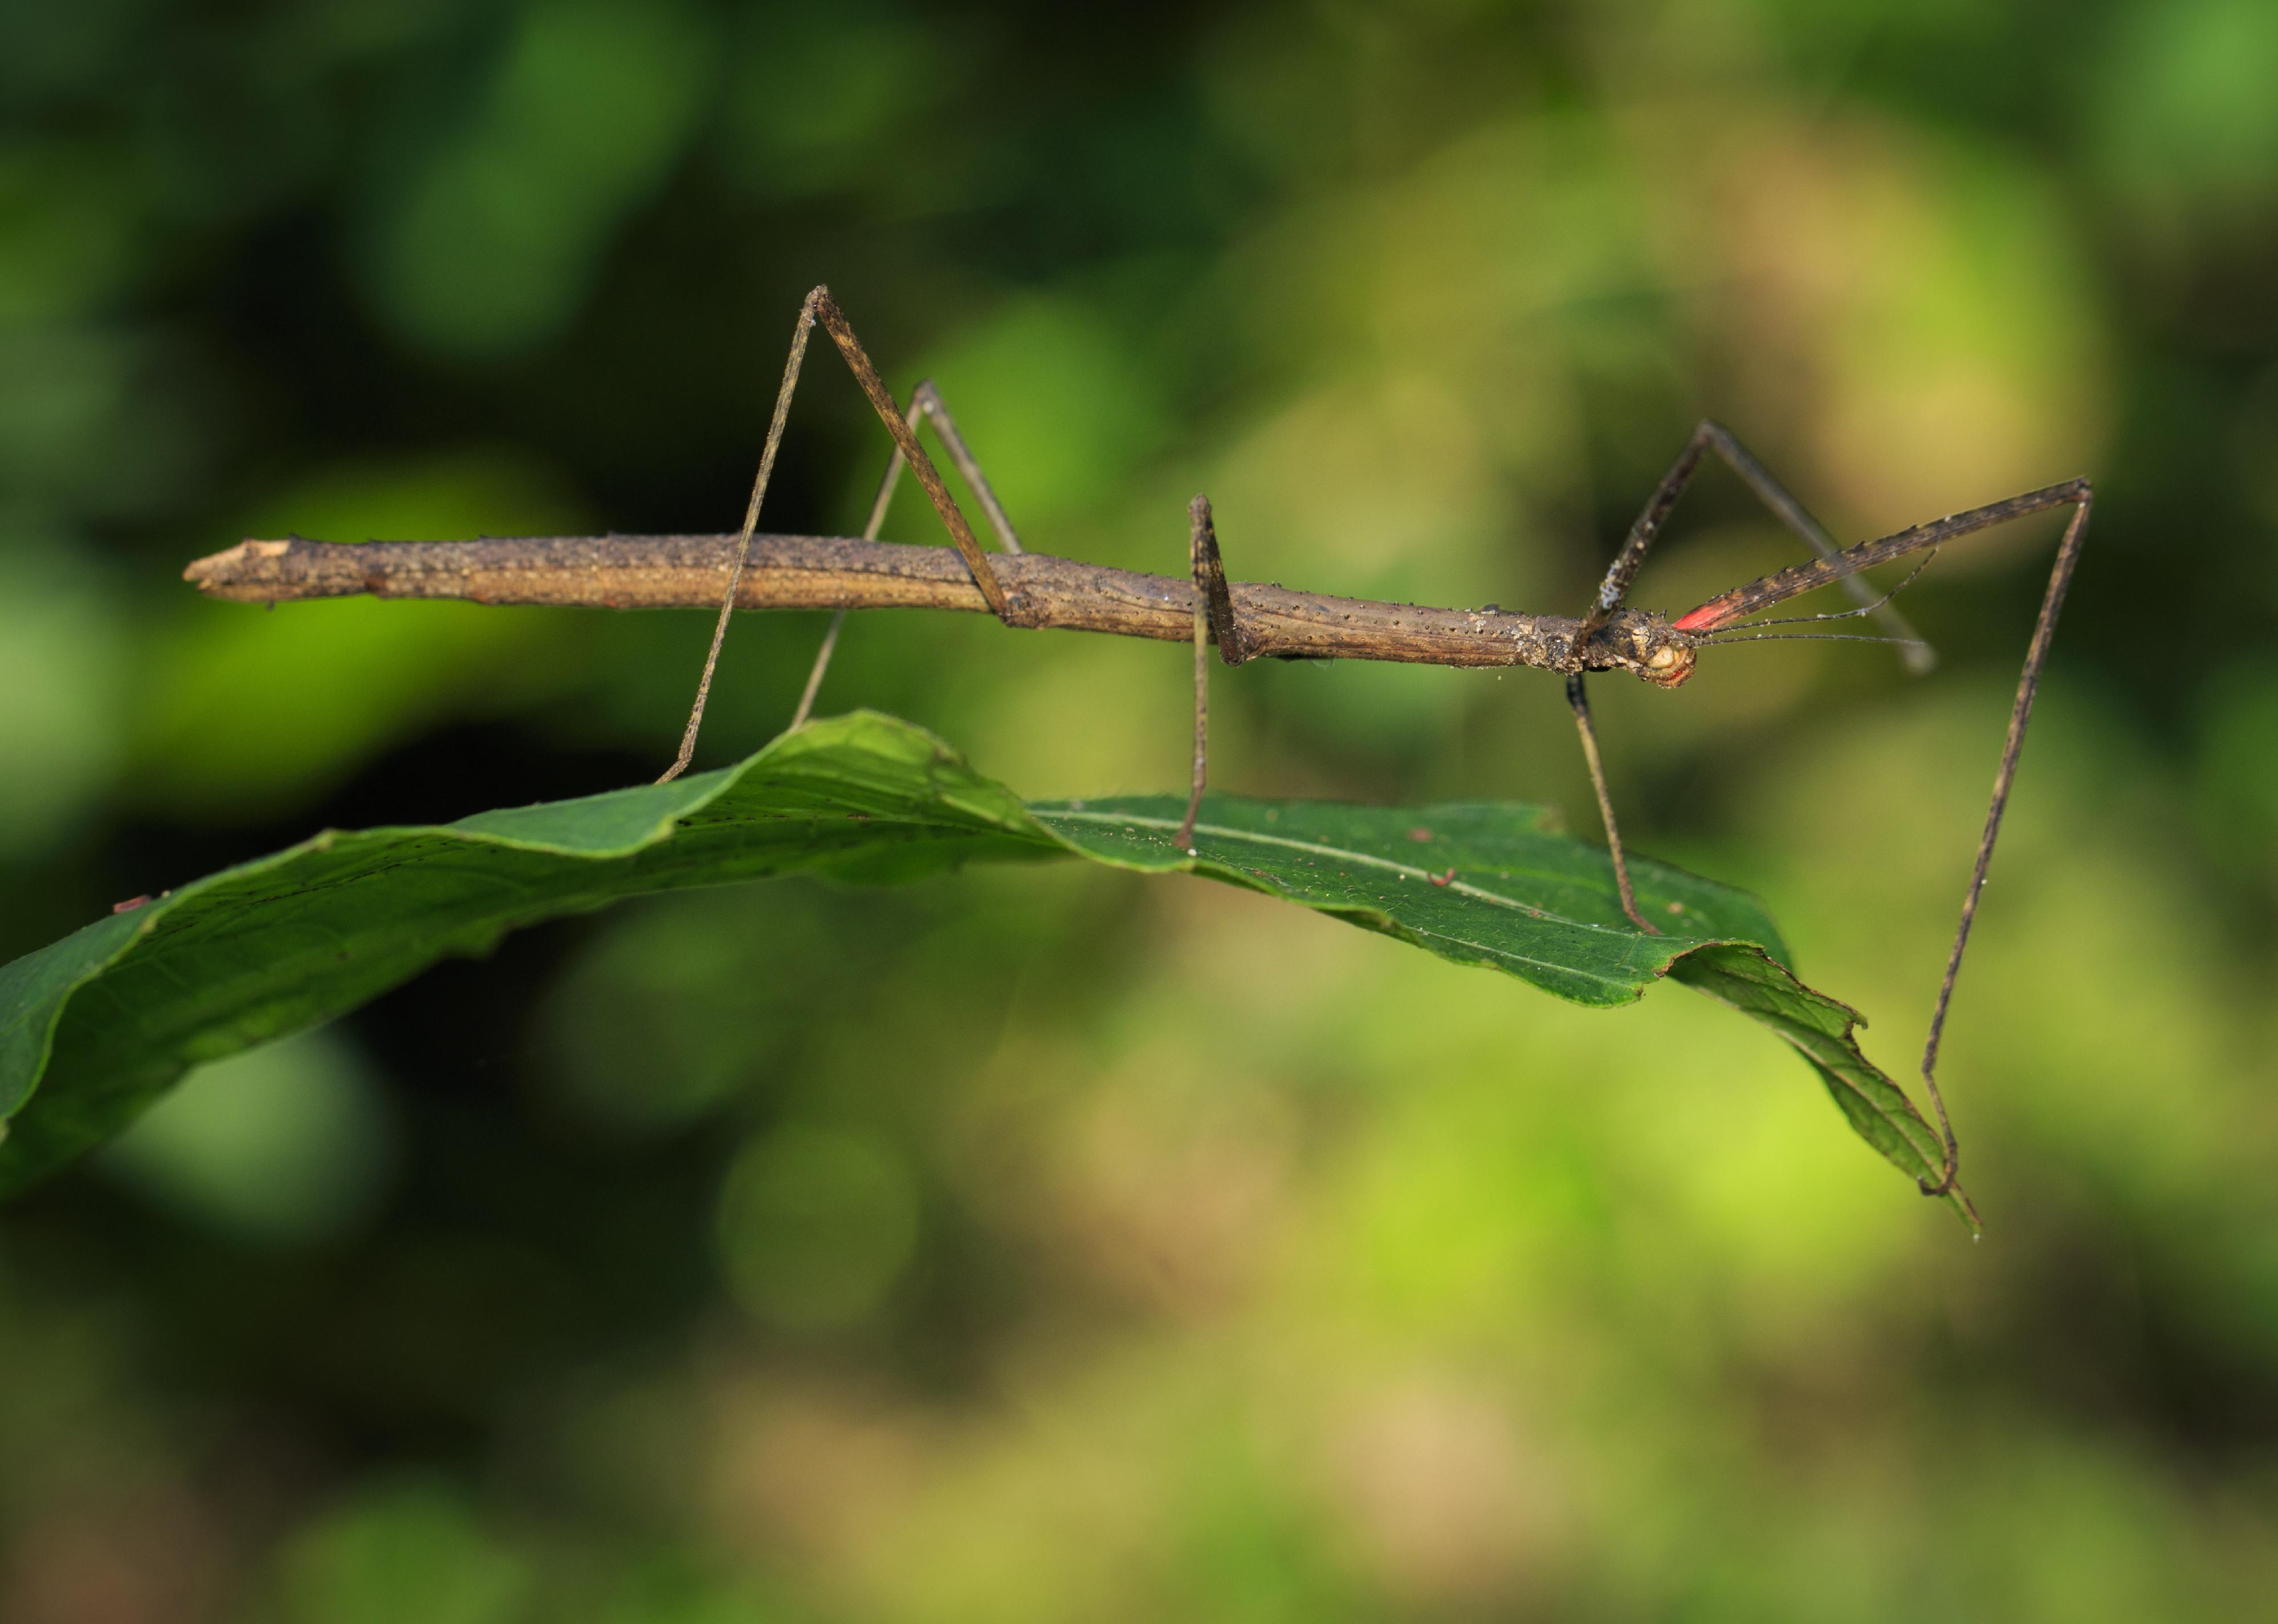 Giant stick insect on leaf.